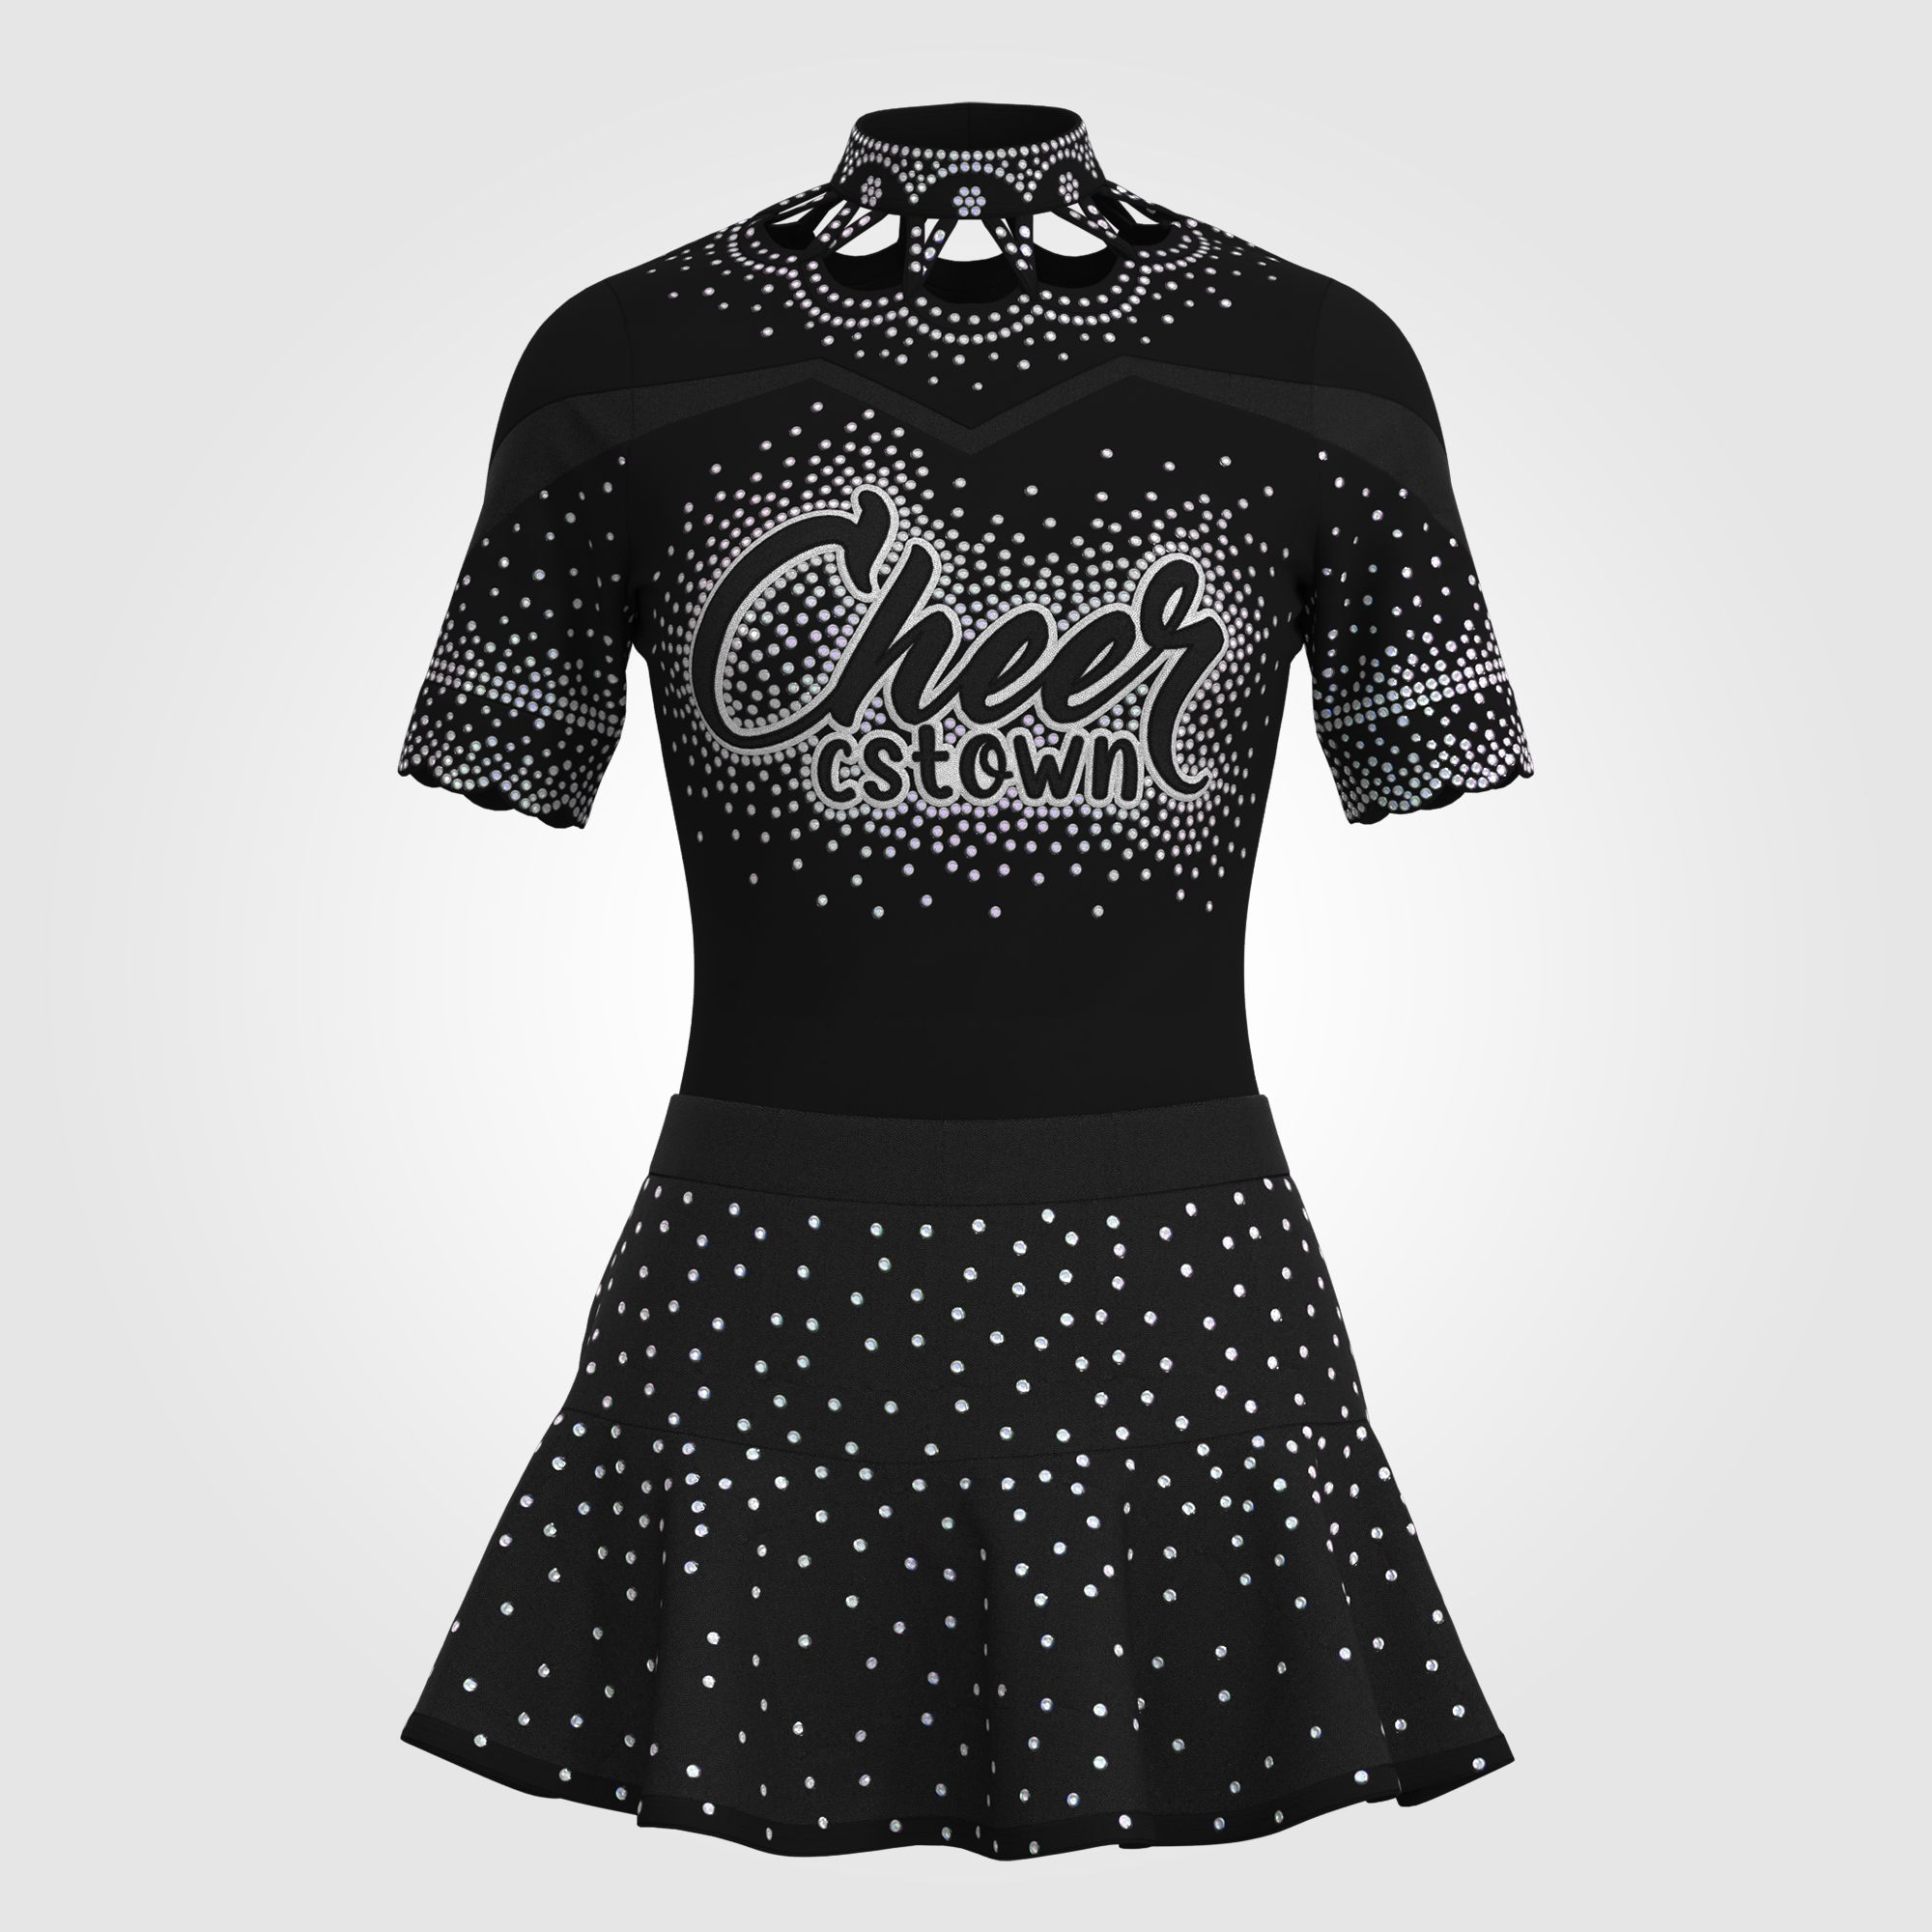 short sleeve black cheer outfit